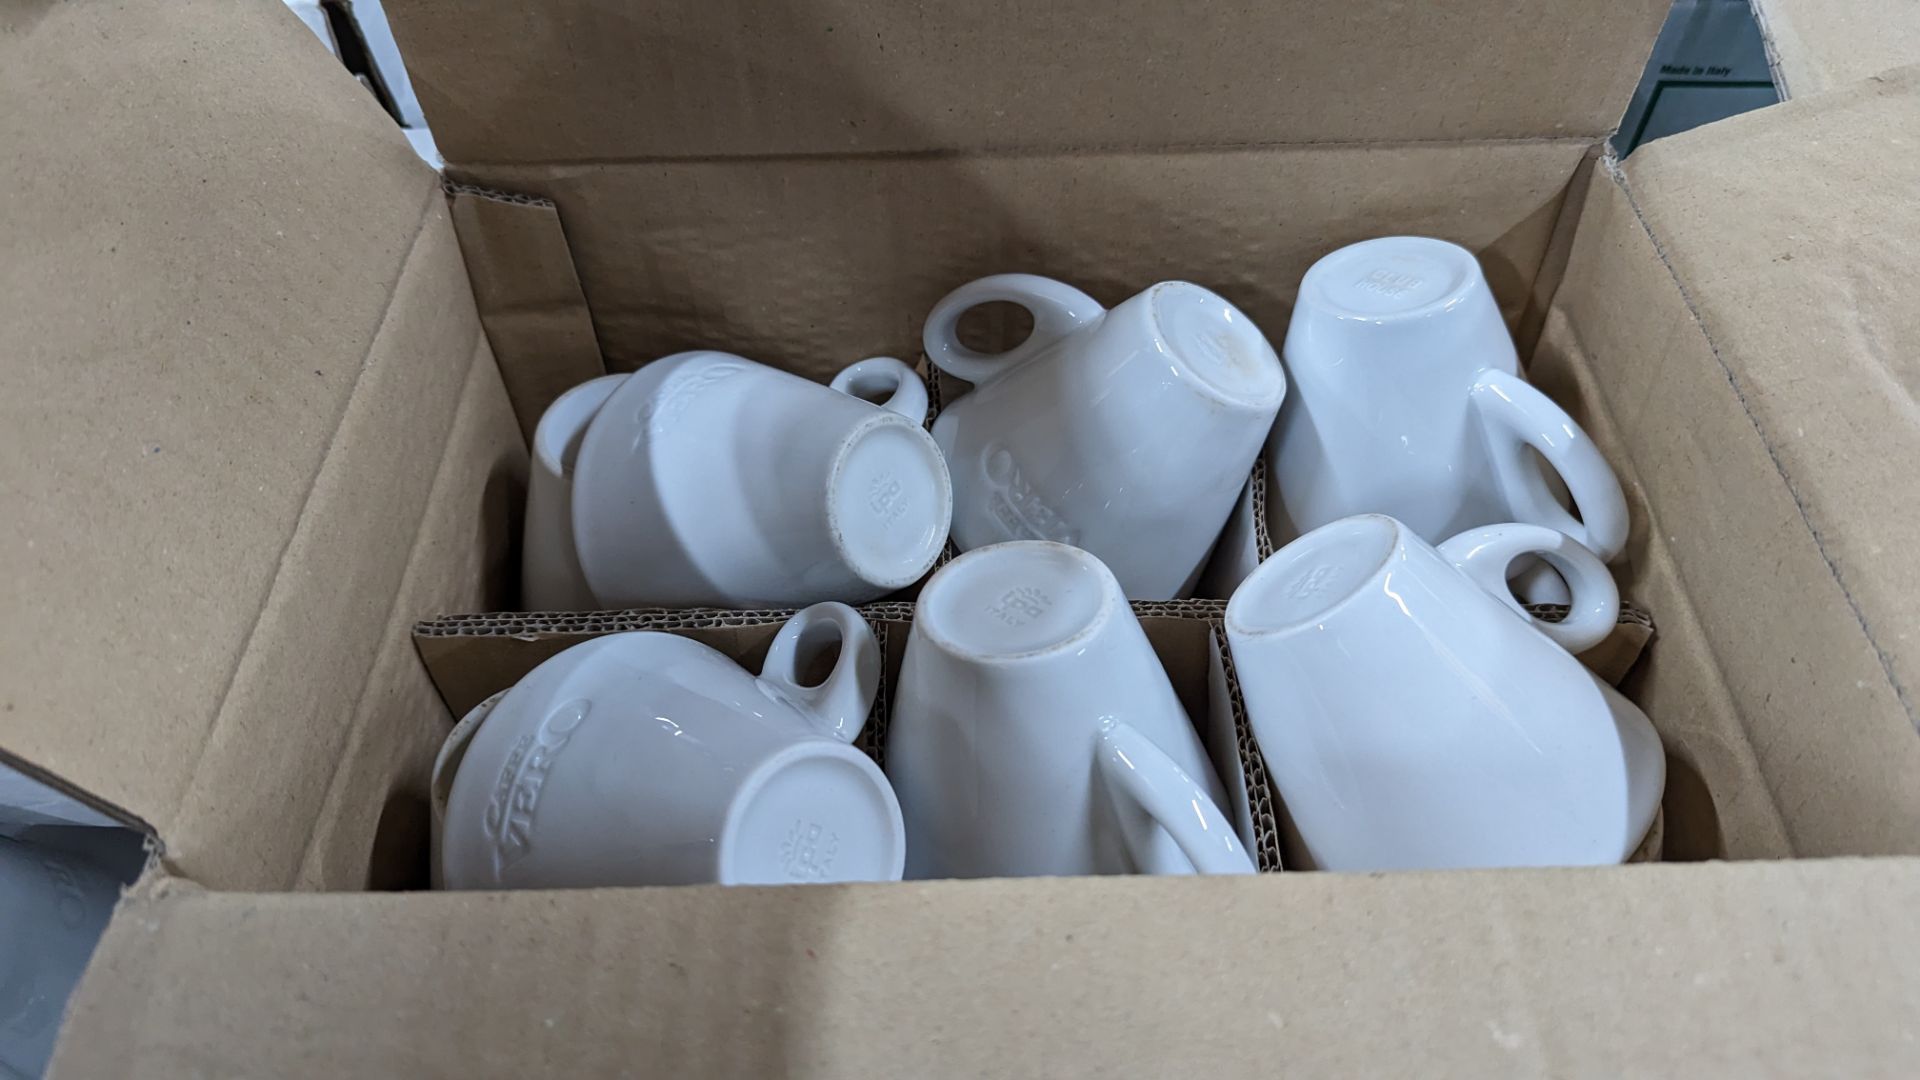 6 boxes of coffee cups and saucers - each box typically contains 6 cups and 6 saucers, however the s - Image 6 of 10